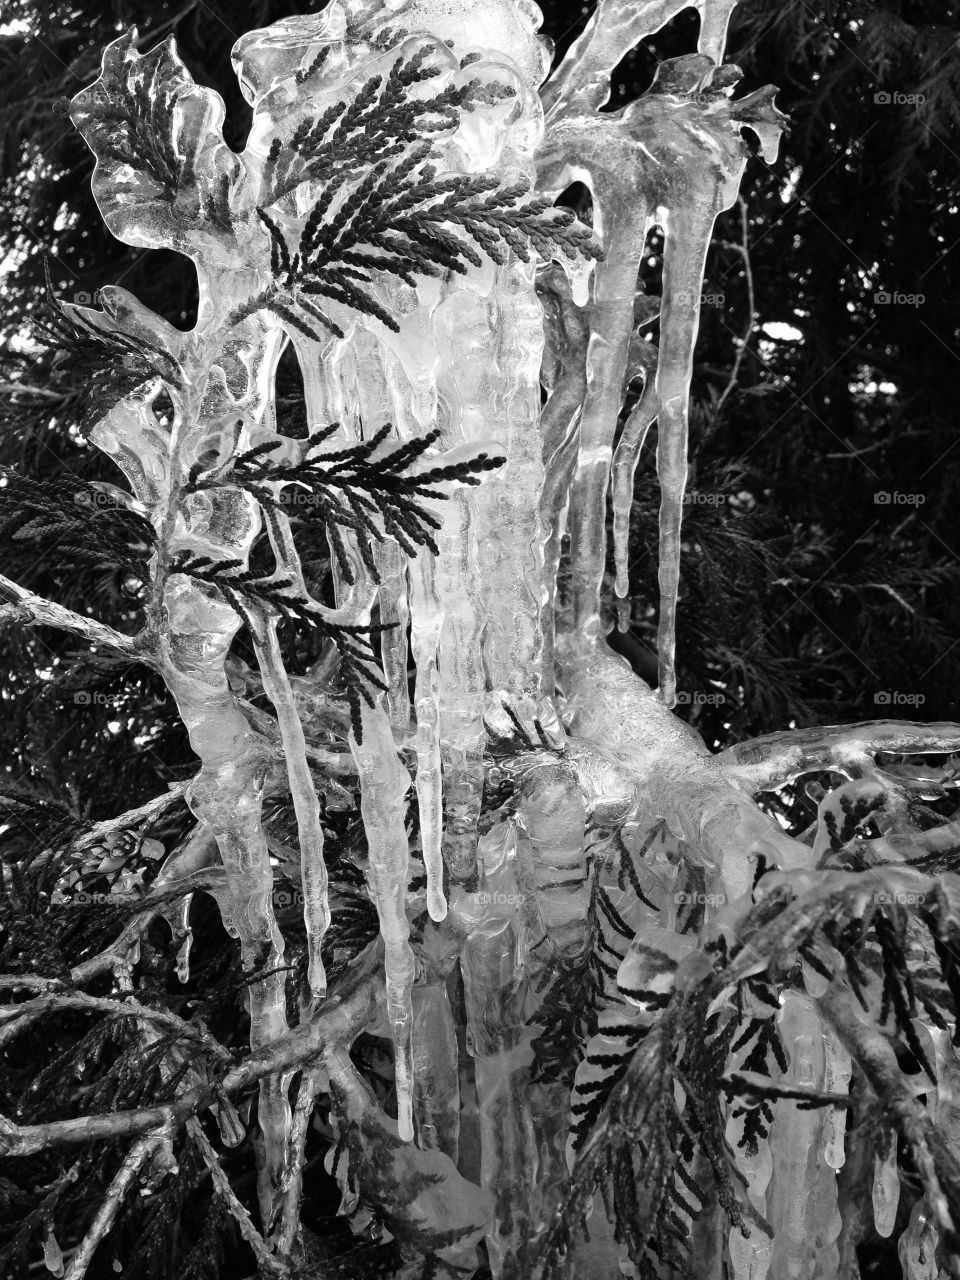 Chilly icicles resulting from the frozen winter weather in the north.